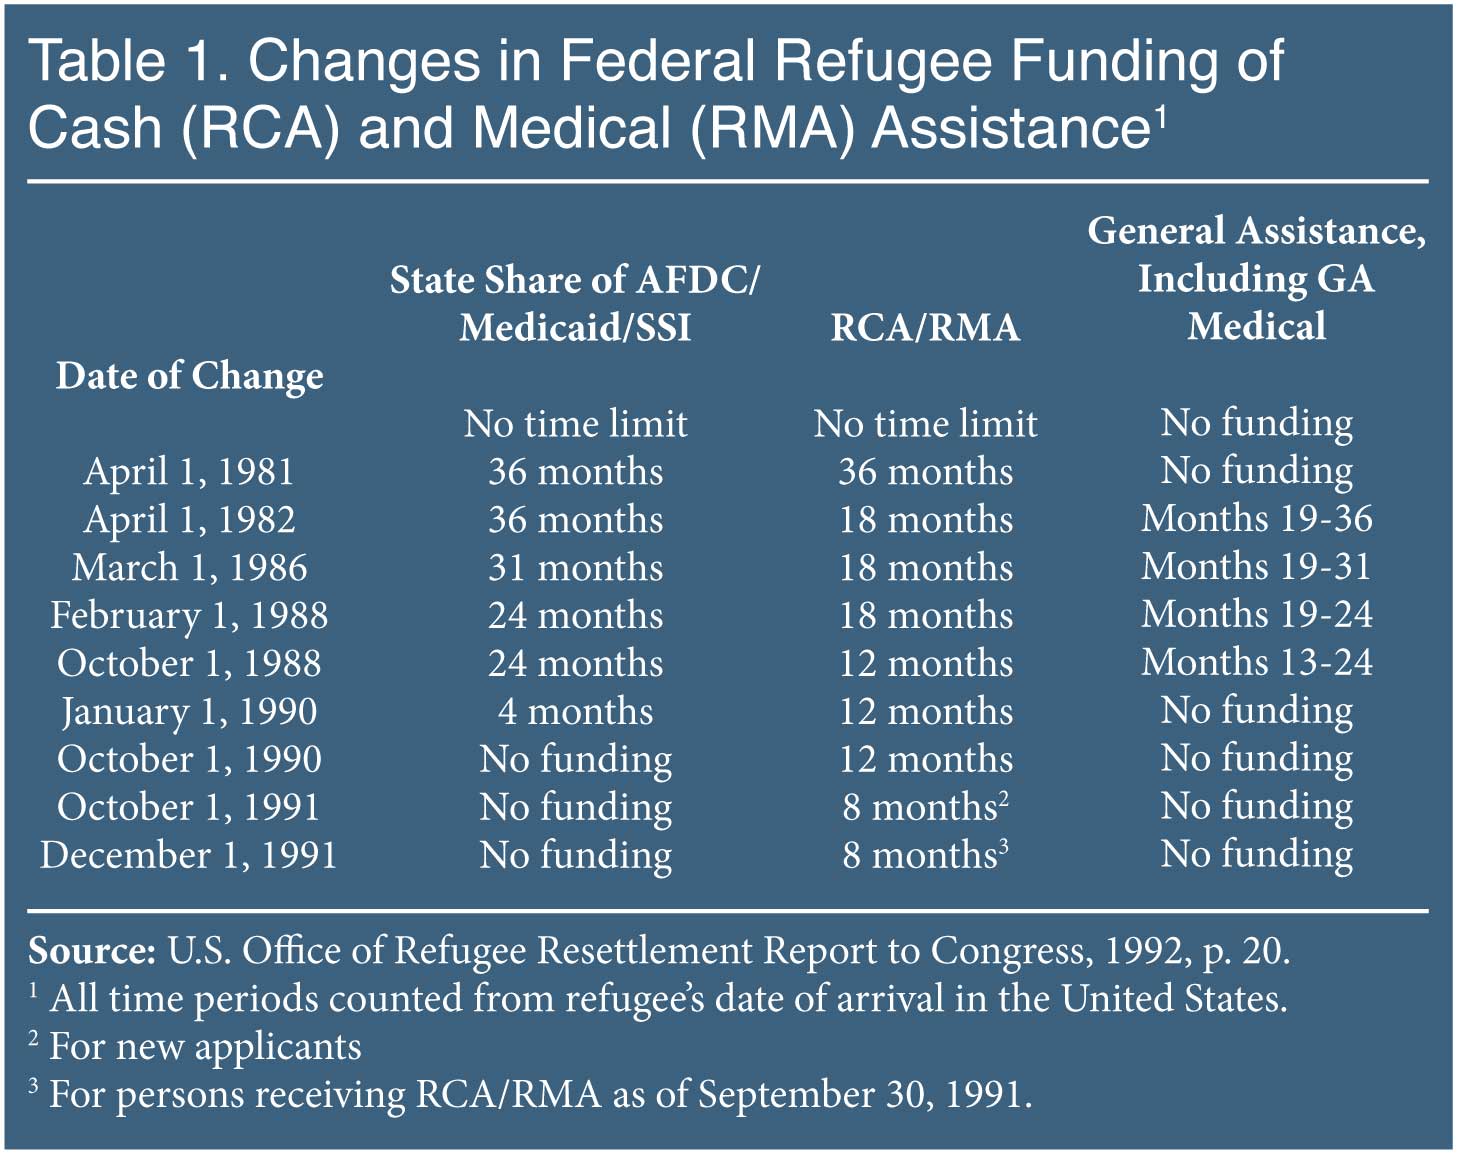 Table: Changes to Federal Refugee Funding of Cash (RCA) and Medical (RMA) Assistance